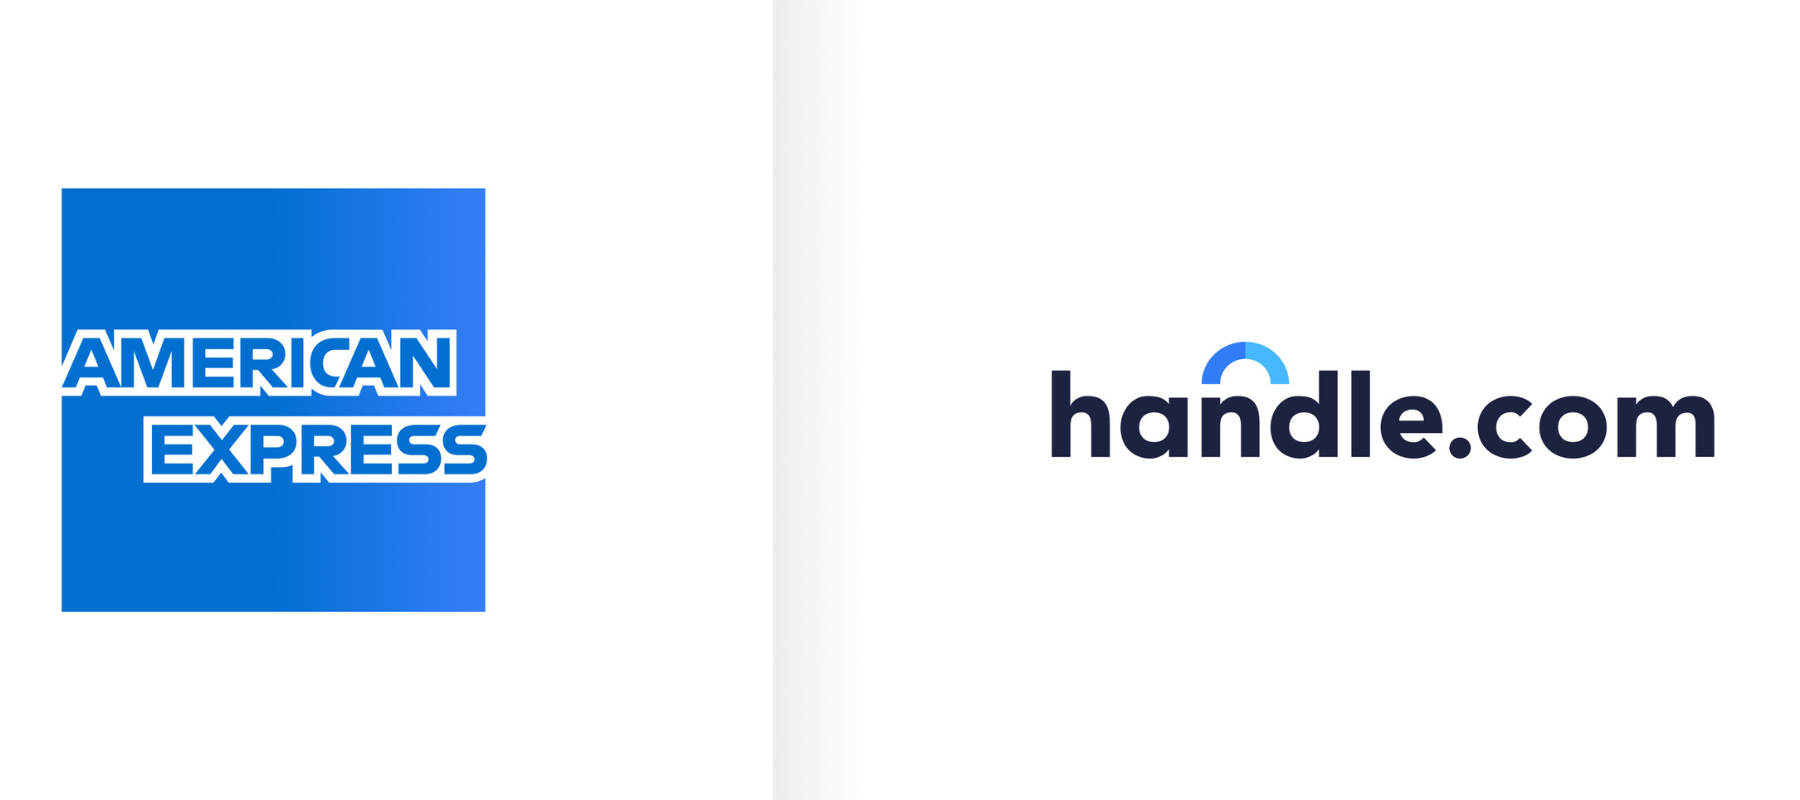 Construction payments solution Handle.com secure investments from Amex Ventures and Suffolk Technologies to accelerate growth